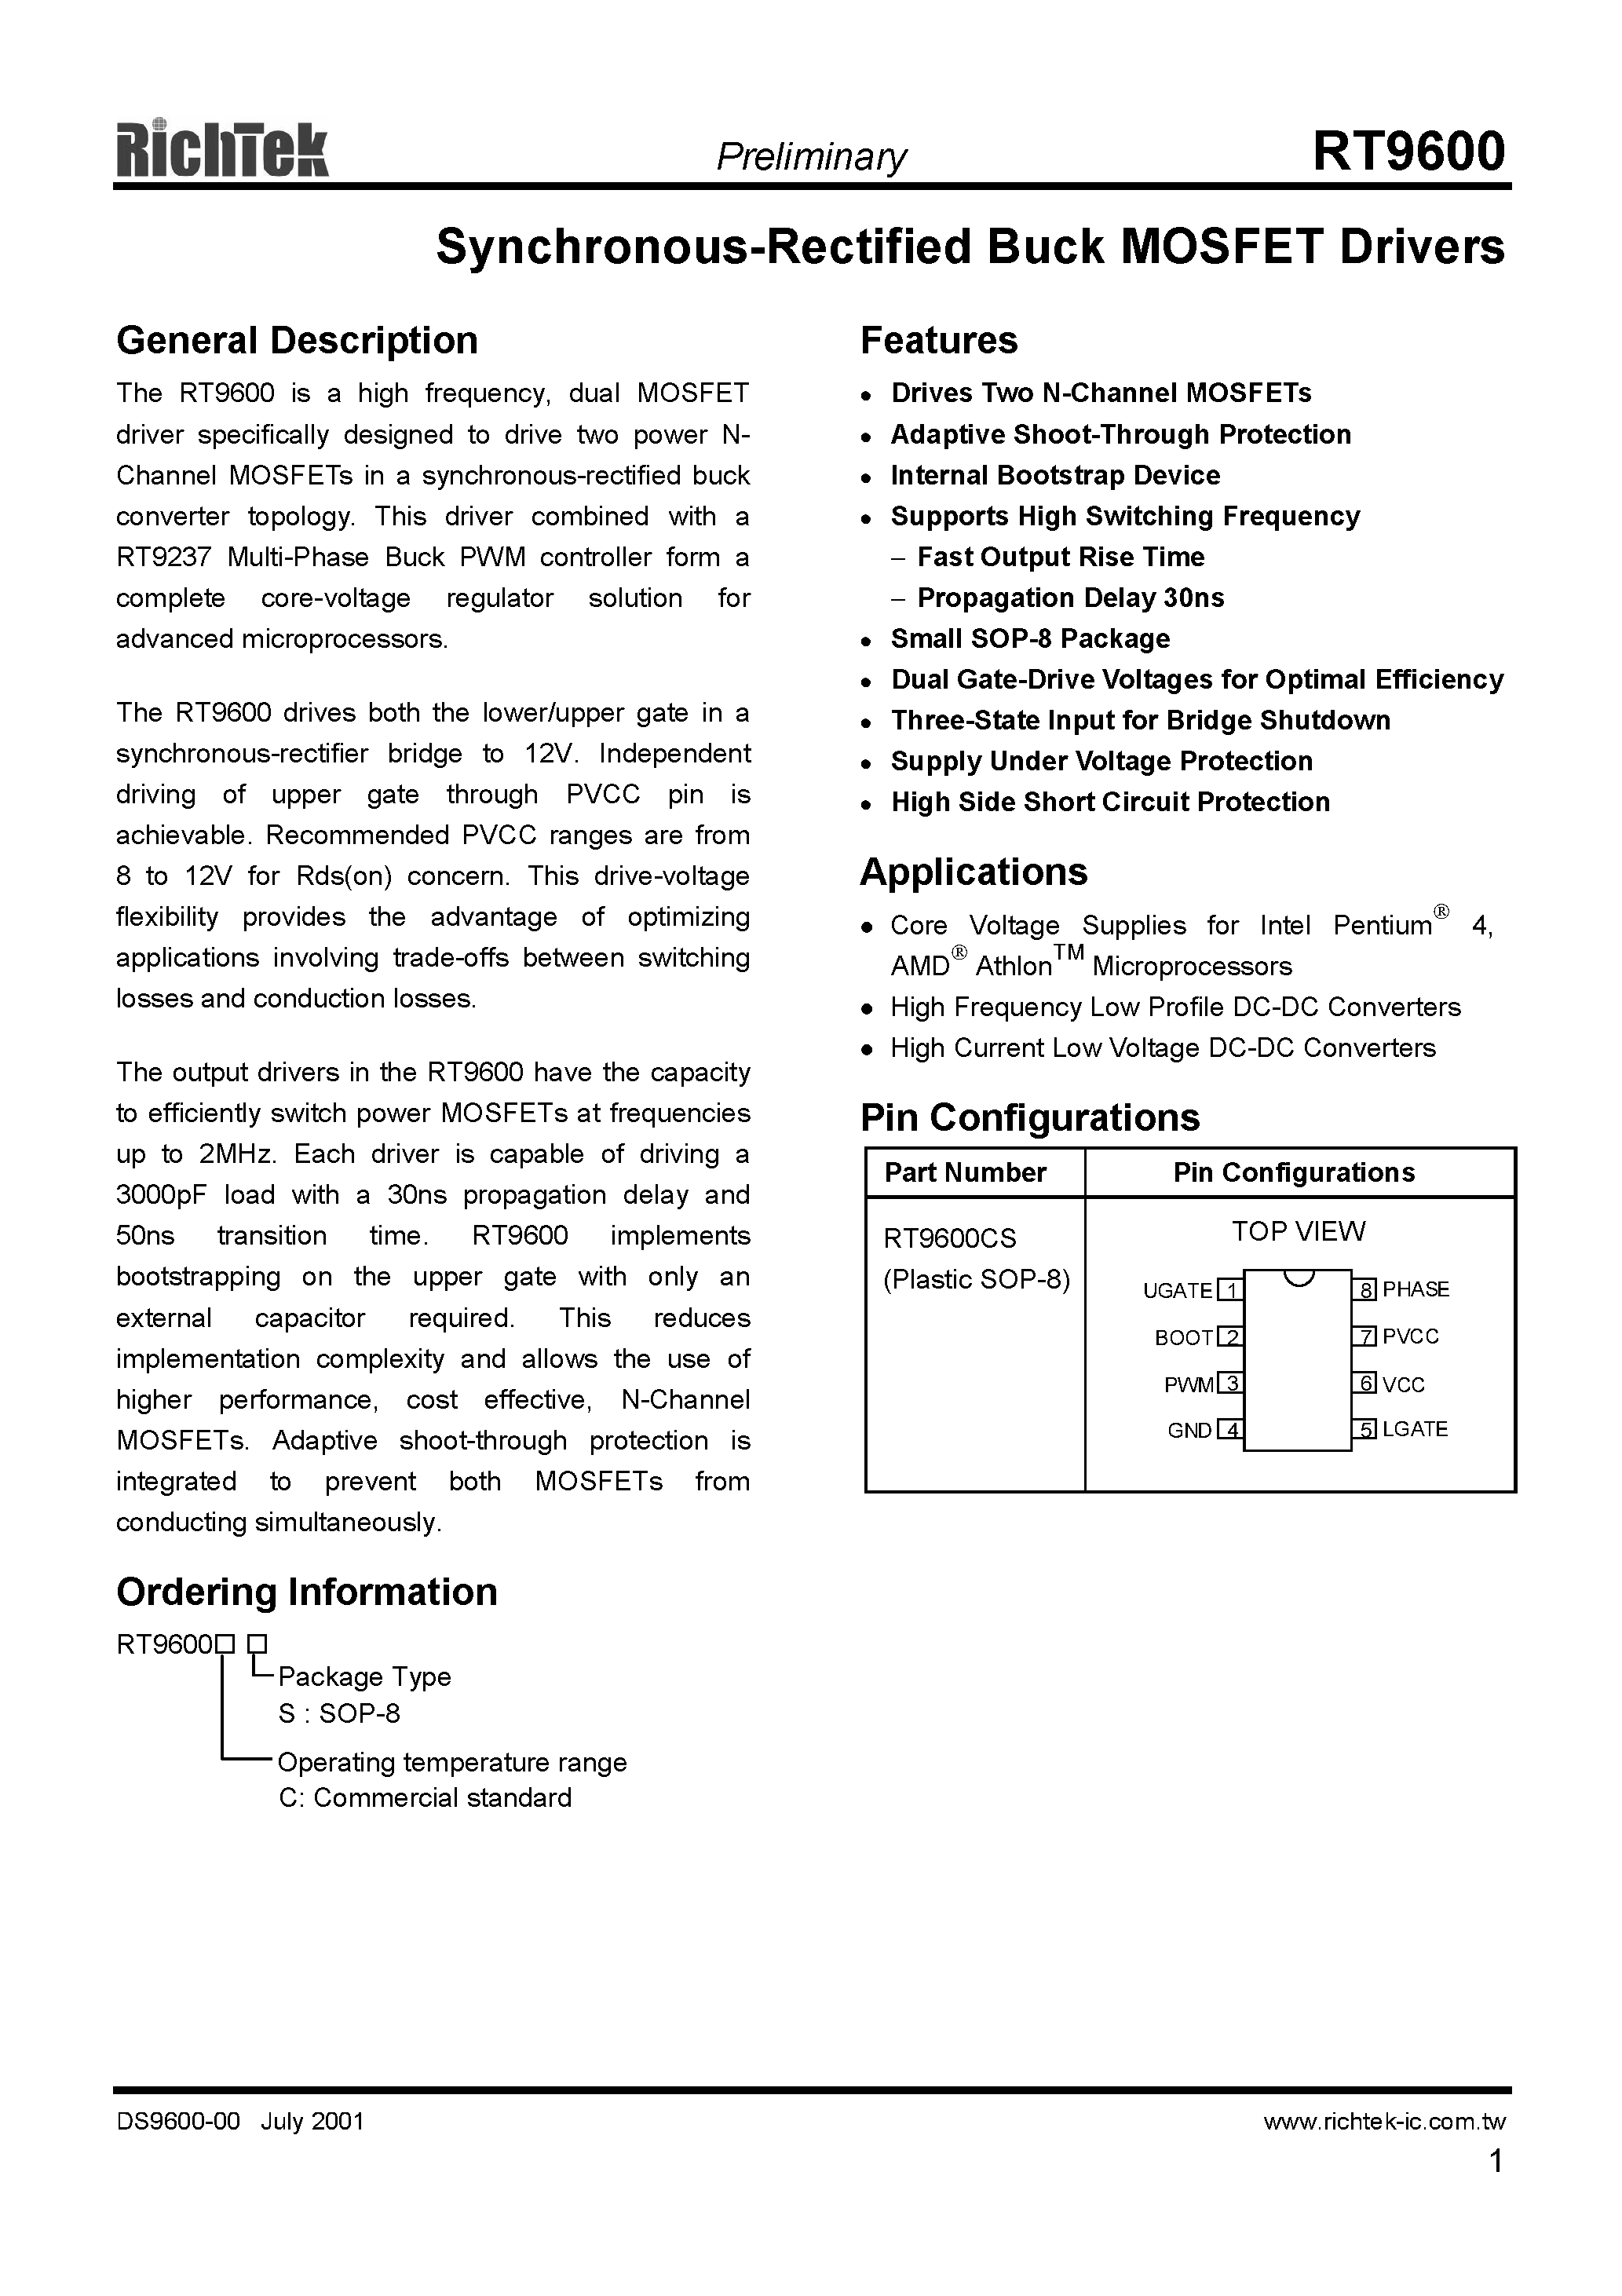 Datasheet RT9600 - SYNCHRONOUS-RECTIFIED BUCK MOSFET DRIVERS page 1